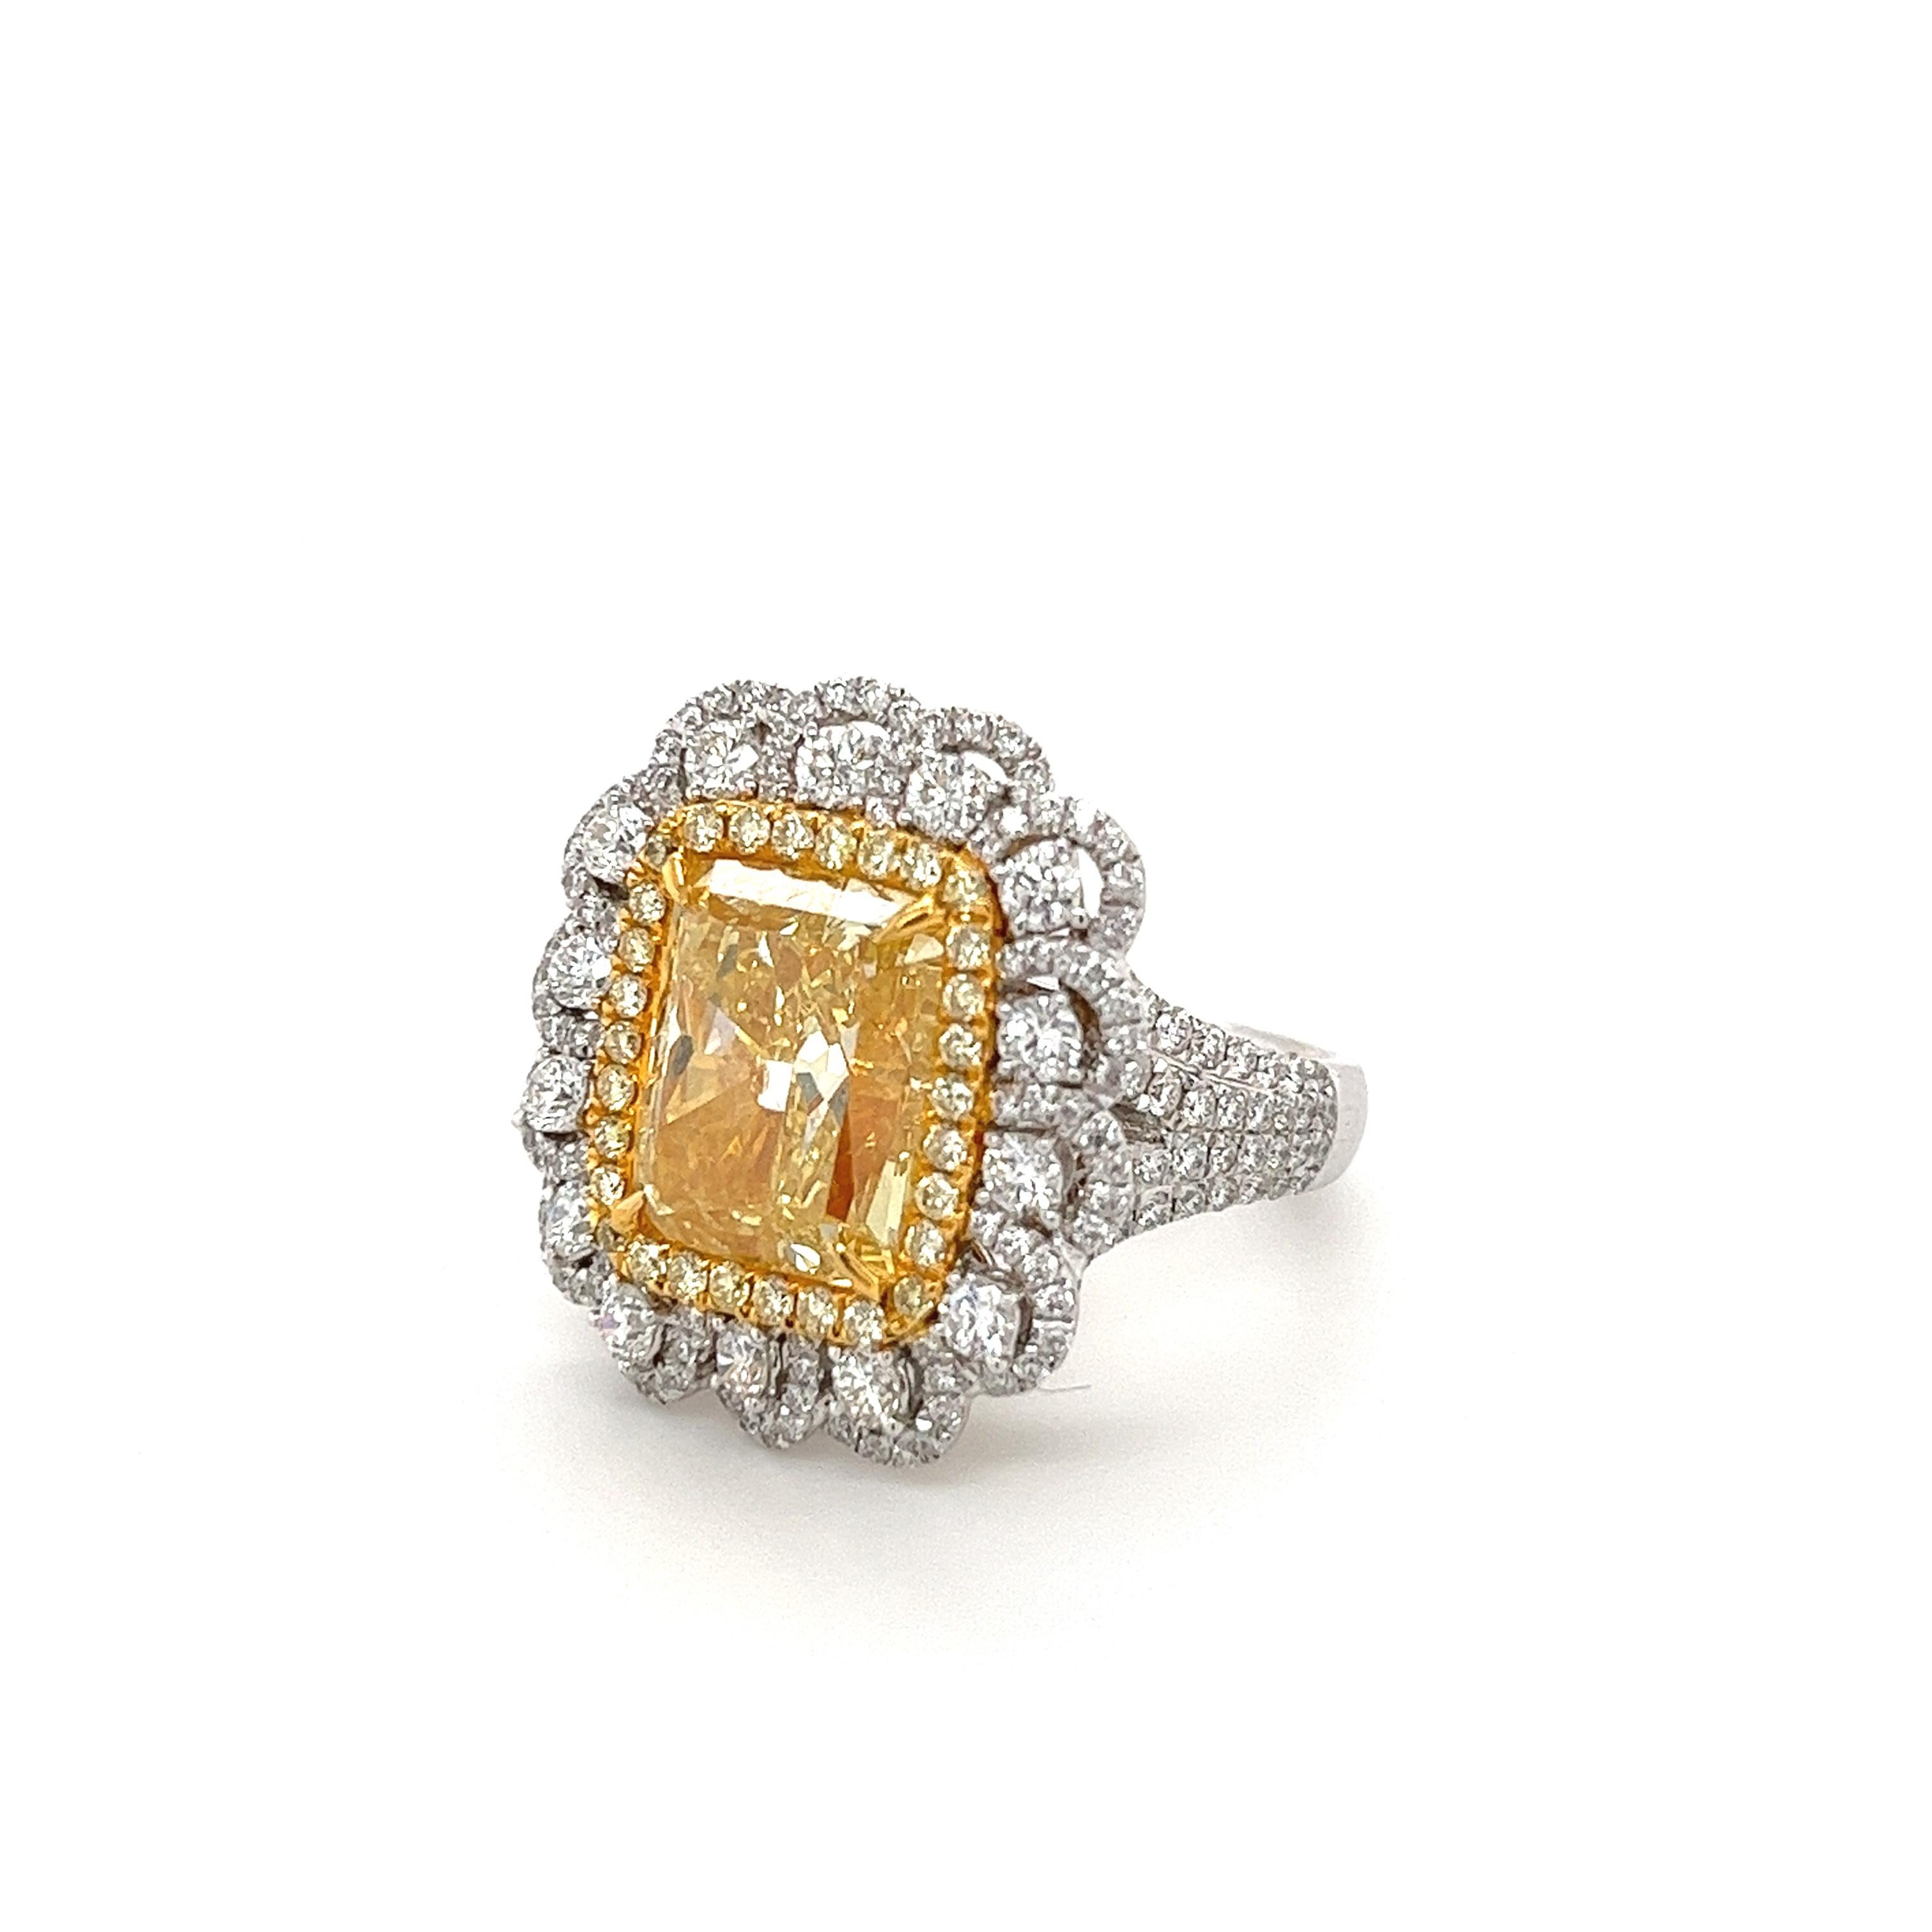 GIA Certified Fancy Intense Yellow 7 Carat Radiant Cut Diamond Ring in 18k Gold In New Condition For Sale In Miami, FL